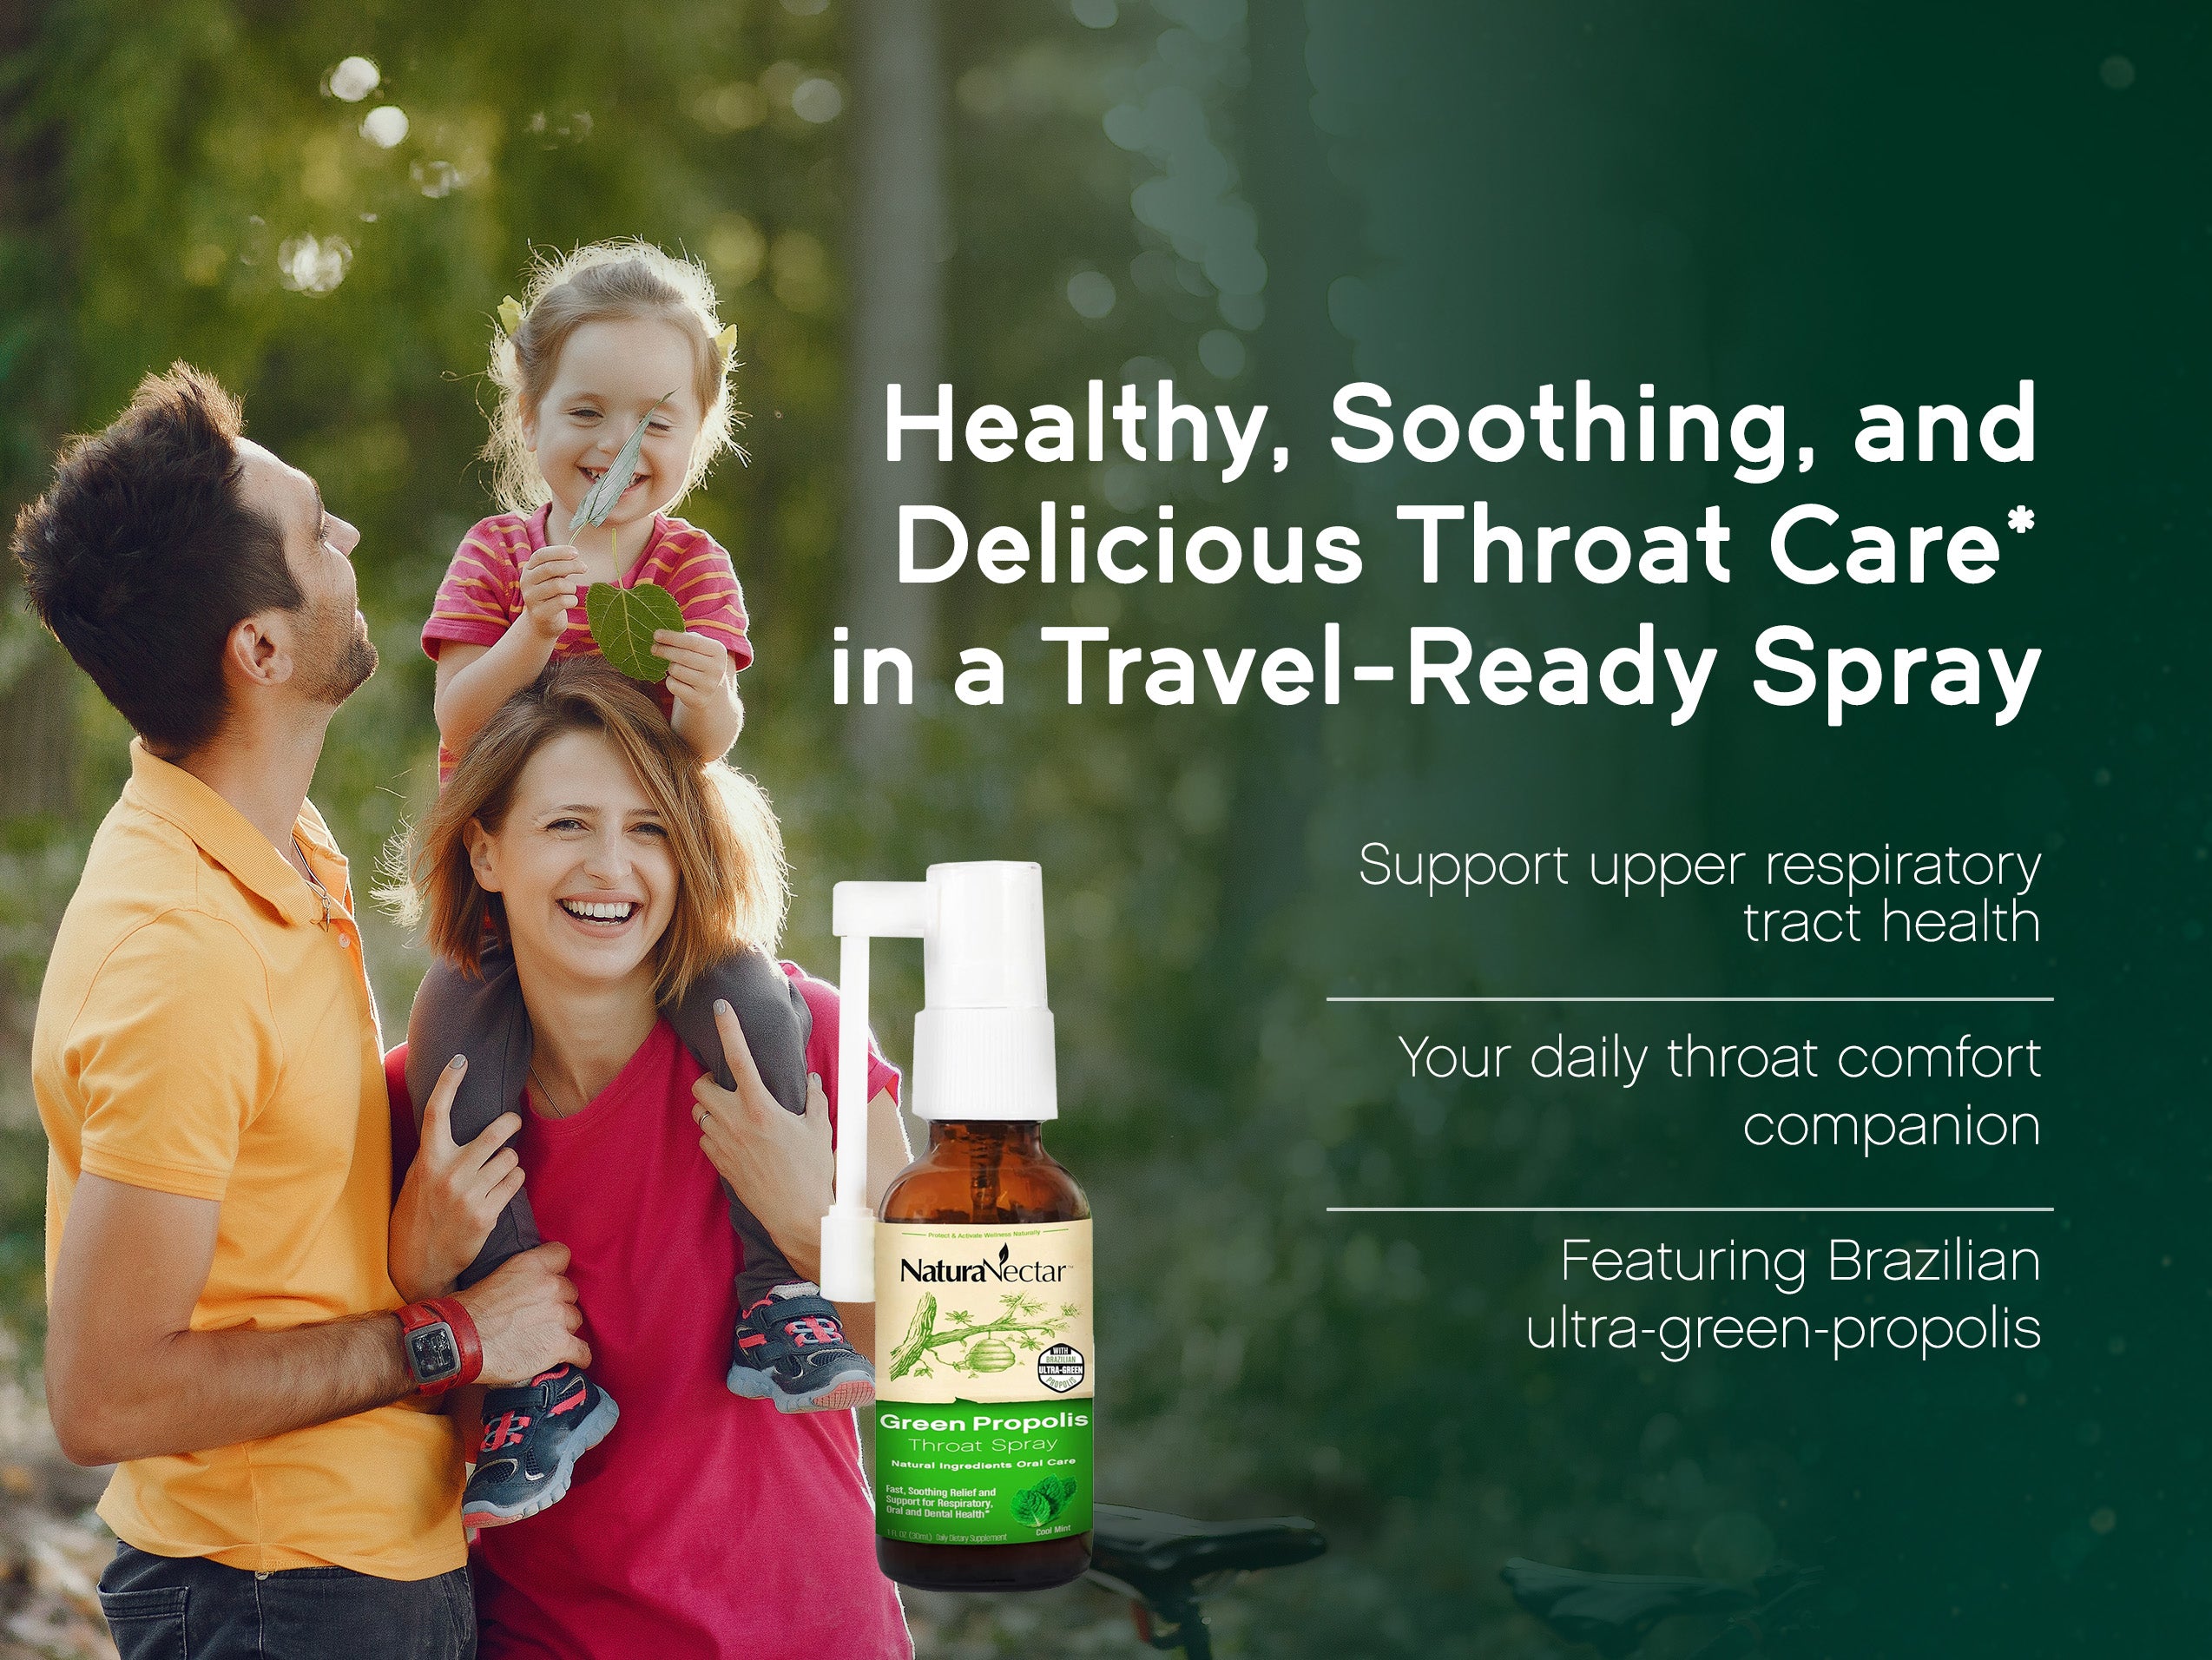 Green Propolis Throat Spray – Organic aromatic acids to support throat* & immune health*. A daily companion for throat comfort. Cool mint flavor